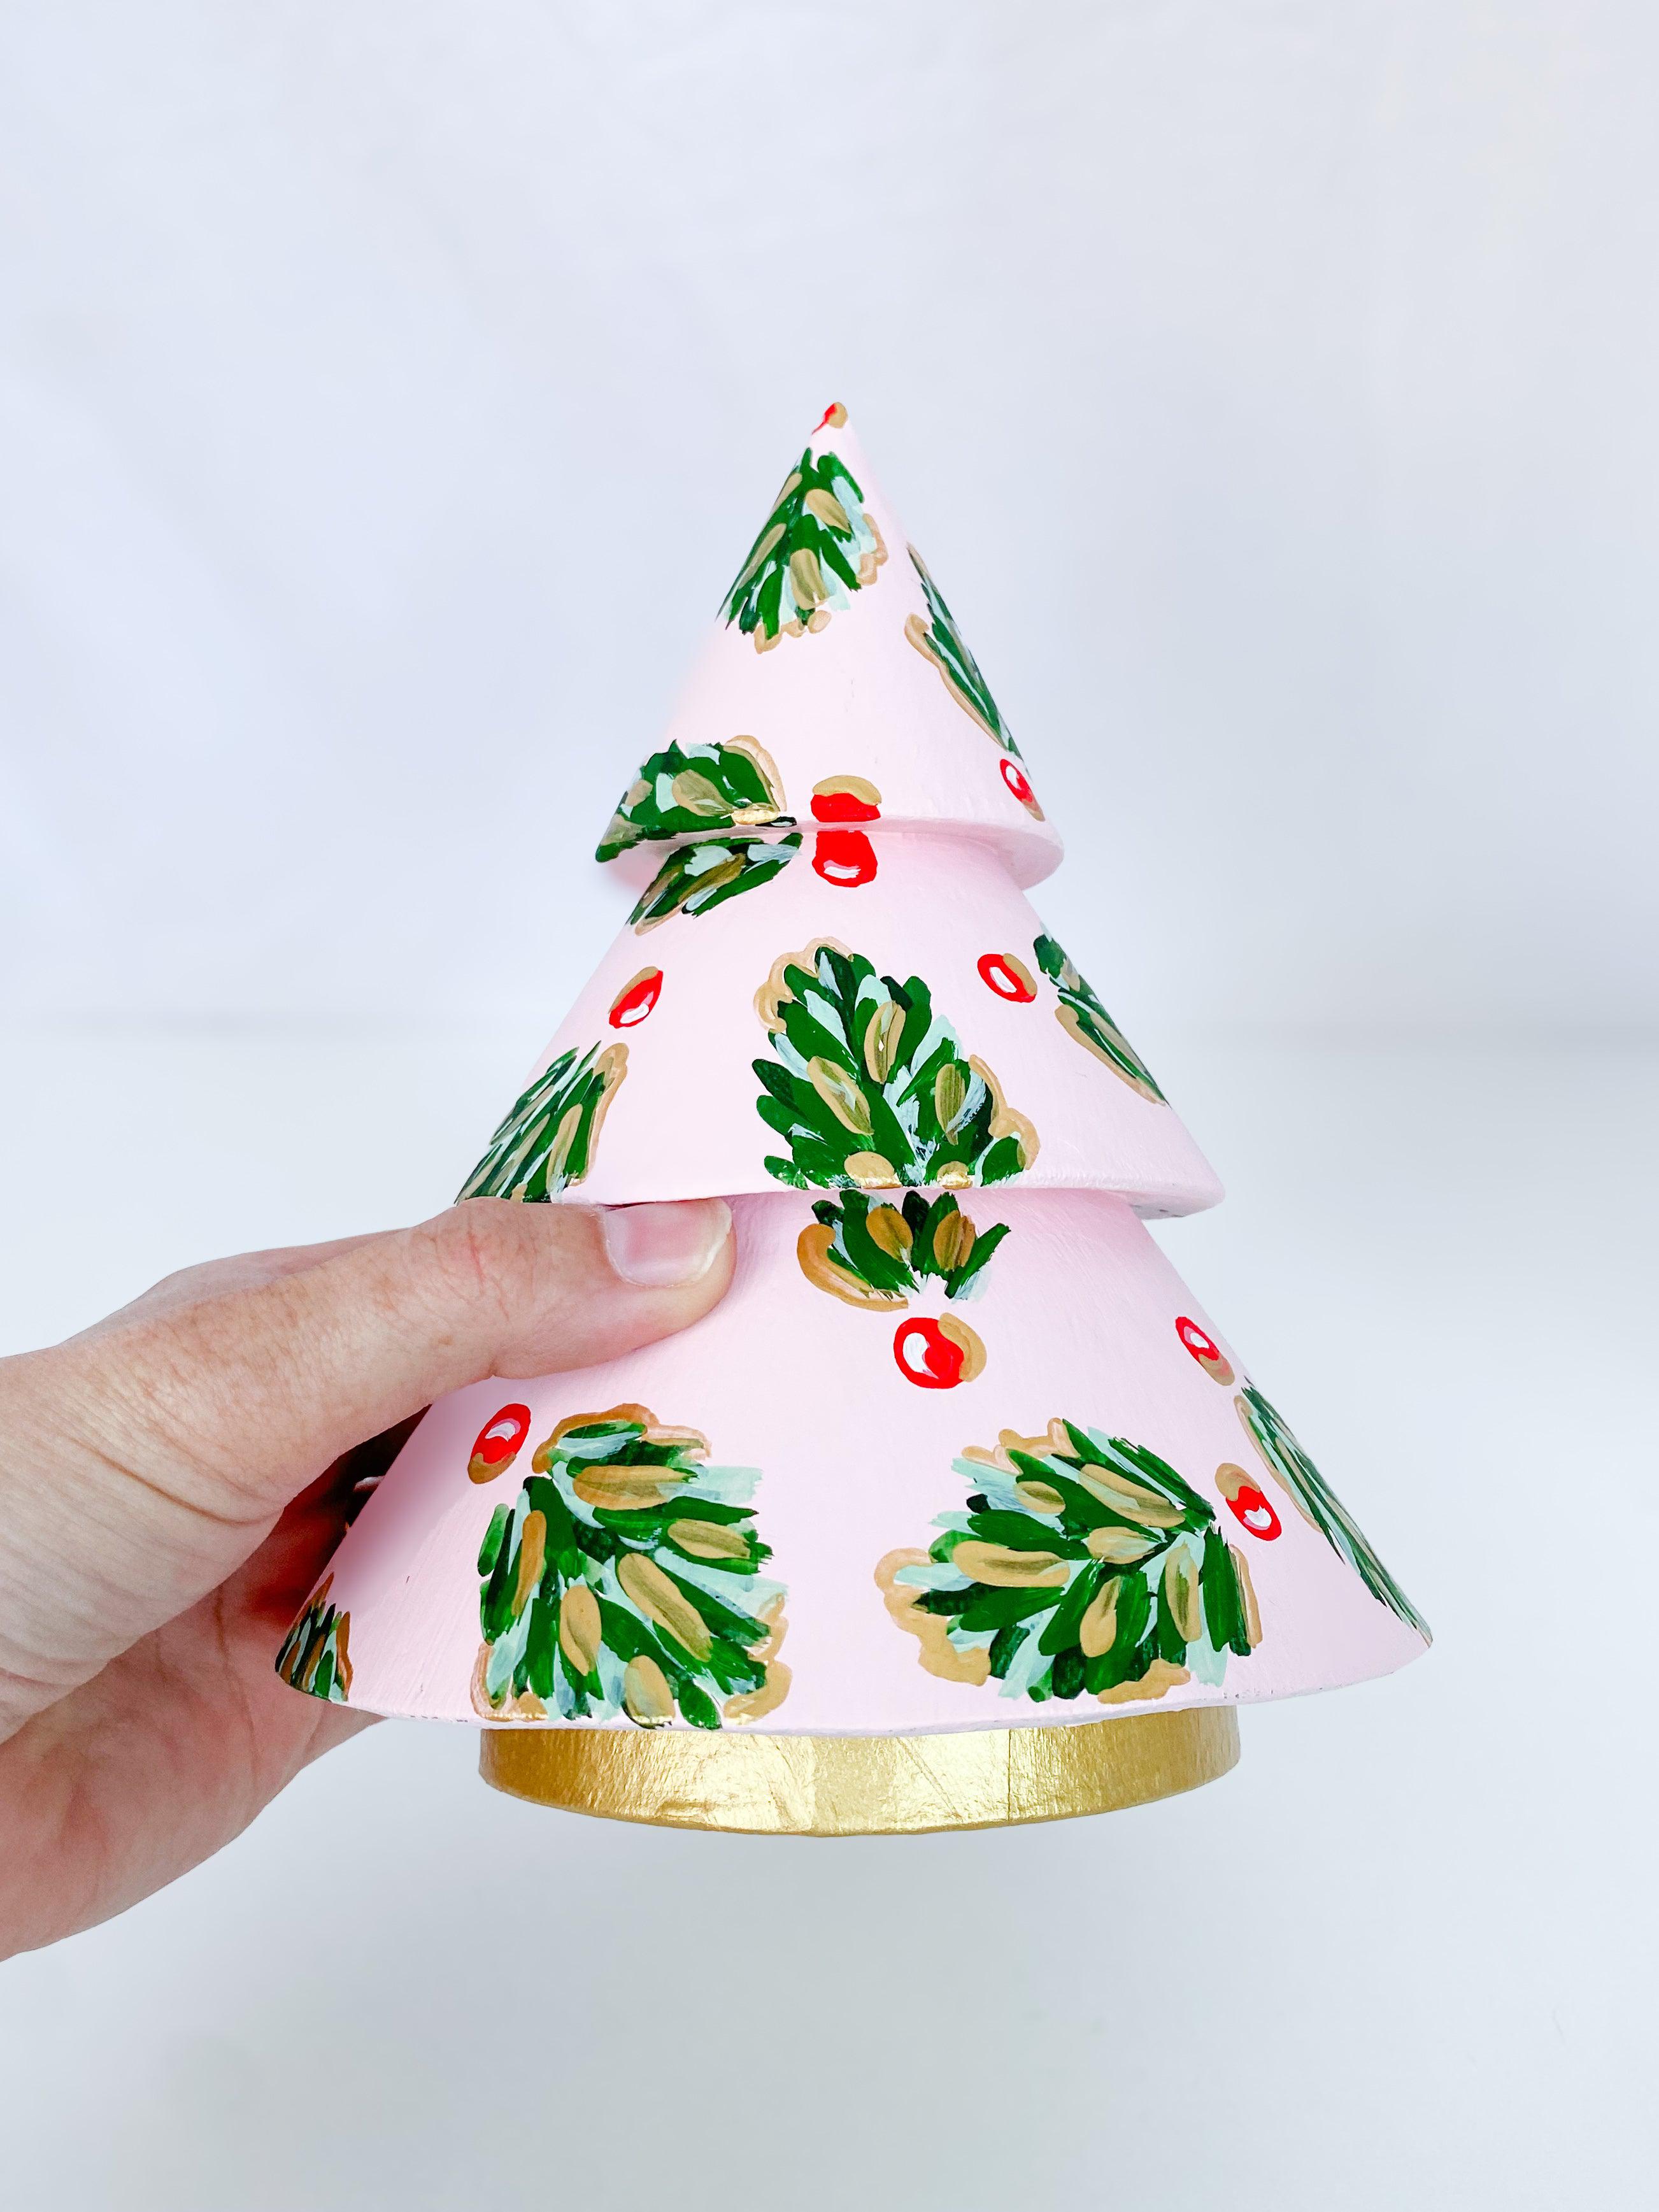 Frosty Pink Golden Holly Mini Tree - Short-Hand-Painted Mini Christmas Tree | Measures 7.5" tall and approx. 5.5" wide | Features the Golden Holly design with a pale pink base and shimmery gold accents and gold trunk | Light-weight and non-breakable paper mache tree | Coated with a protective matte finish that will keep it shimmering year after year | Each tree is slightly different with potential small imperfections due to the hand-painted nature, making each one special and unique!-The Singing Little Bird